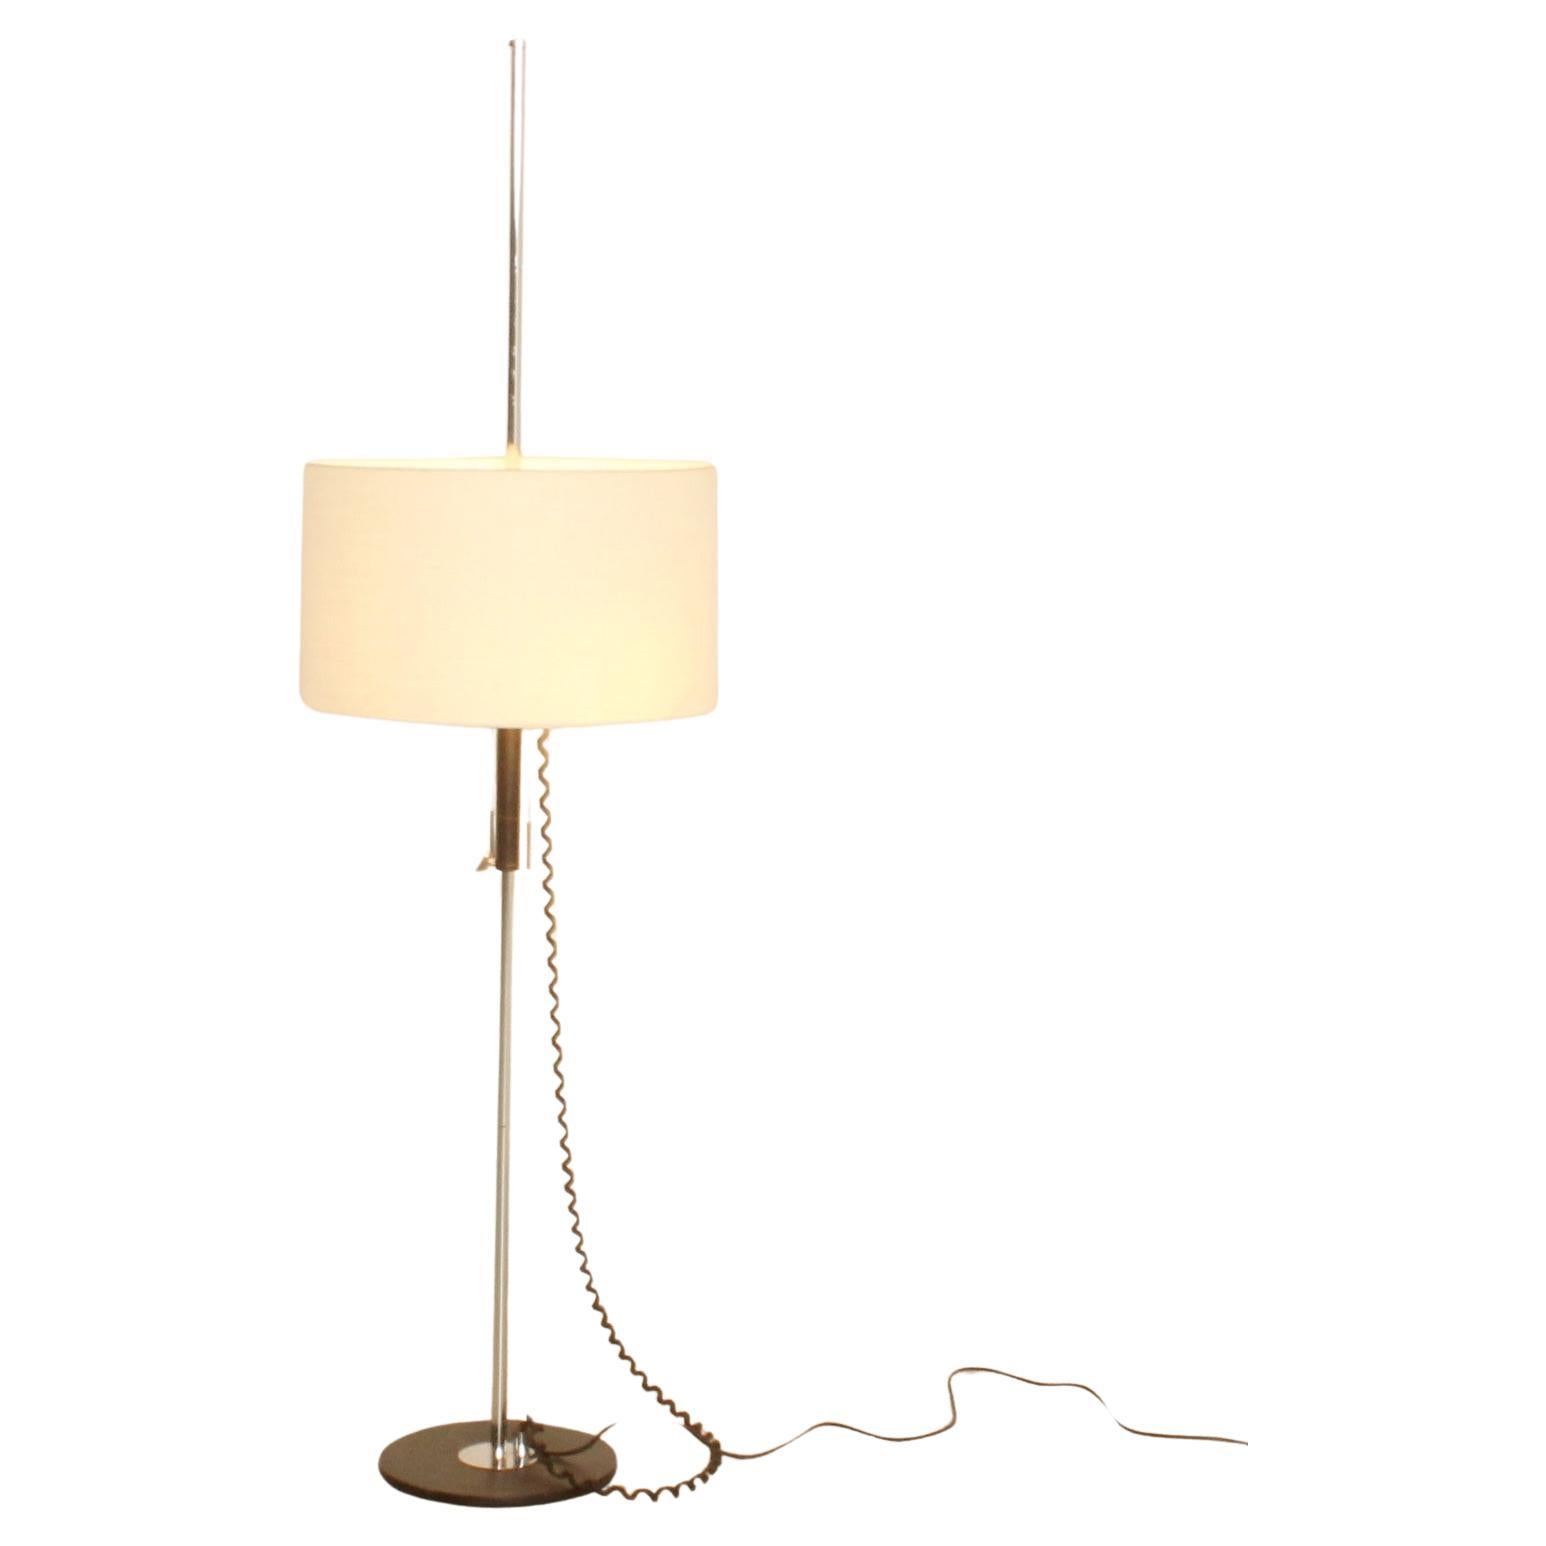 Floor Lamp with Adjustable Lampshade, Spain, 1960's